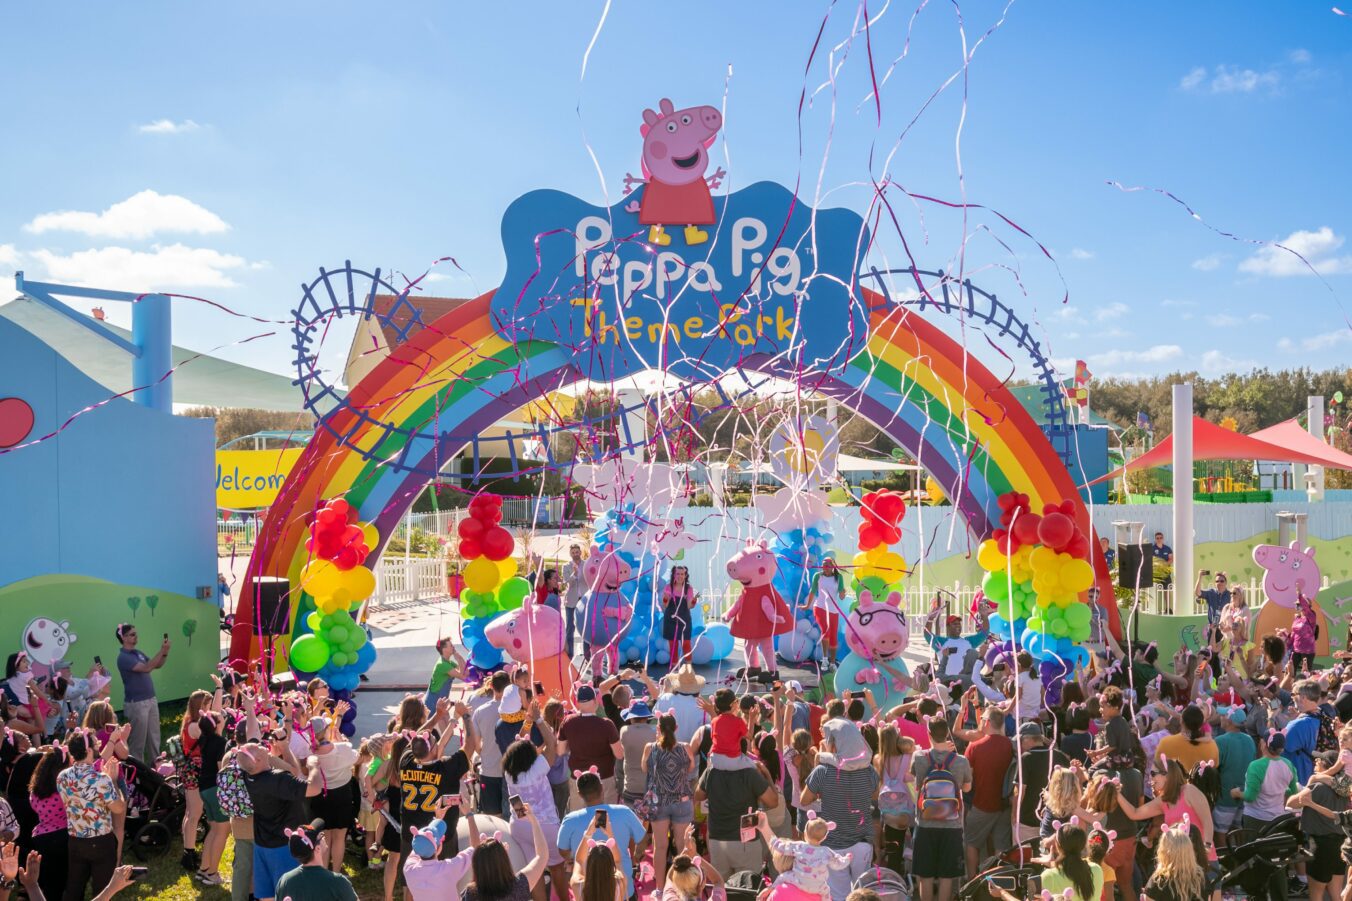 Guests celebrate the grand opening of Peppa Pig Theme Park infront of its colorful entrance